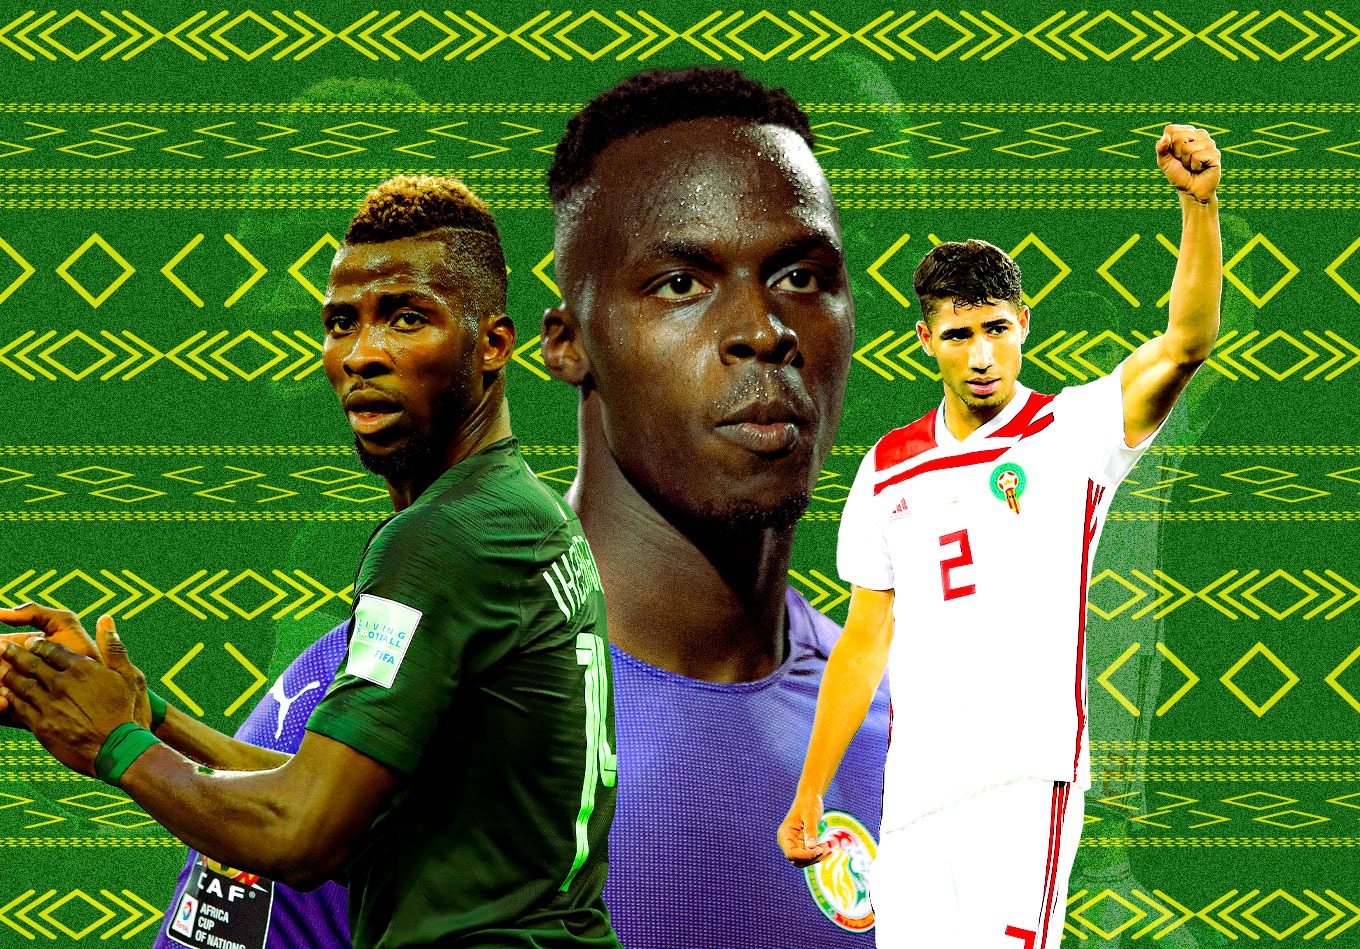 Nations of africa cup 2021 Africa